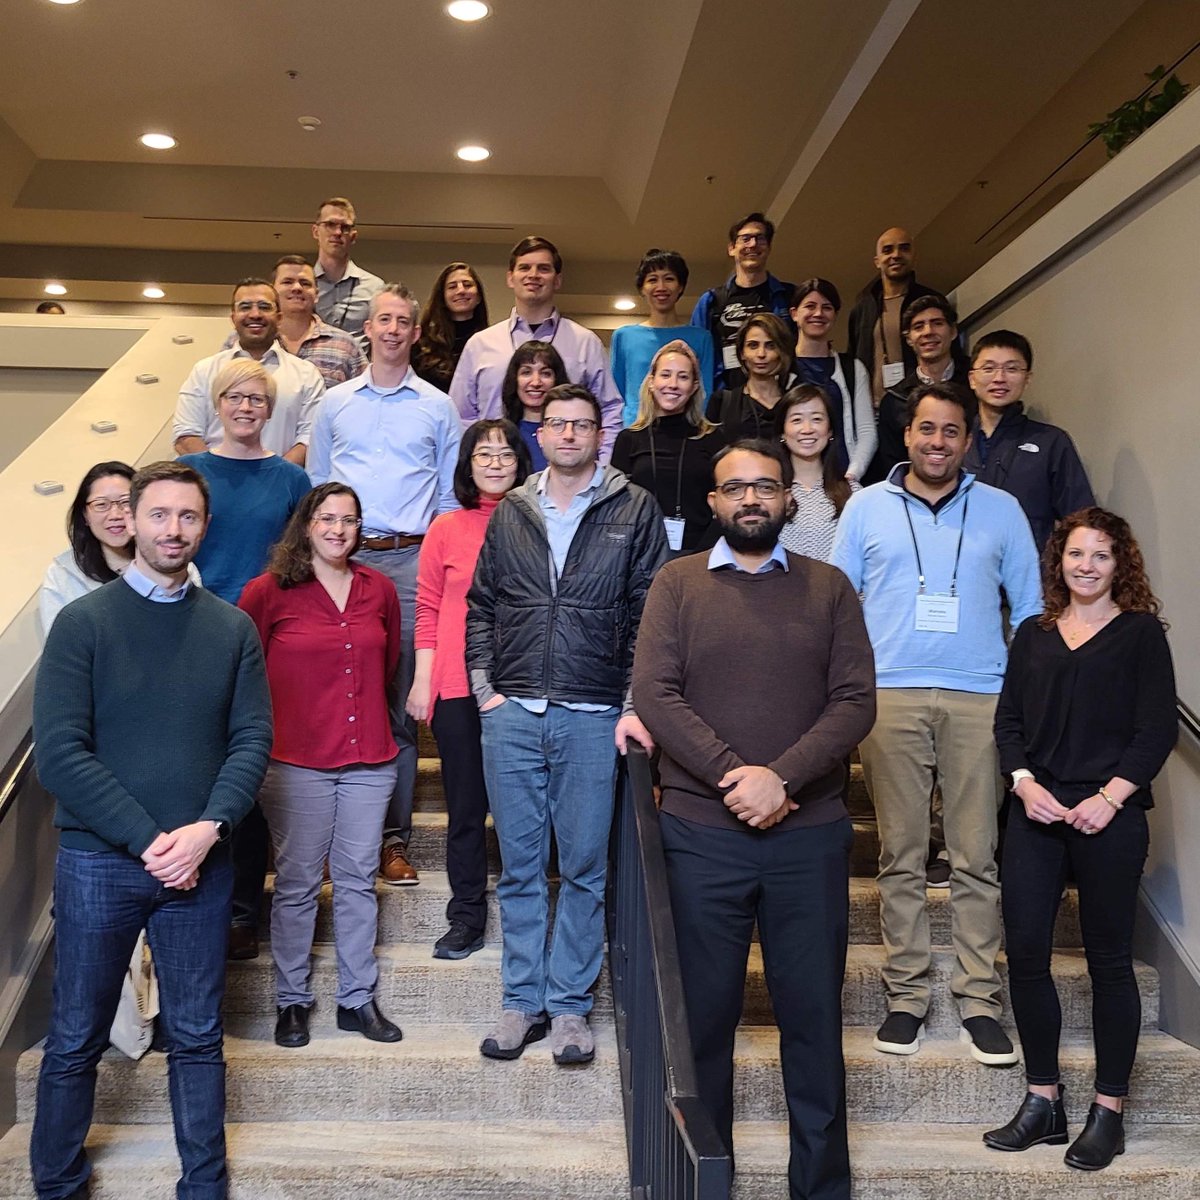 Day-5 of the @RSNA Clinical Trials Methodology Workshop #CTMW
It was a privilege to meet such an accomplished group of individuals looking to drive the field forwards!
@RadITrainEditor #RadInTraining @radiology_rsna @MIRimaging